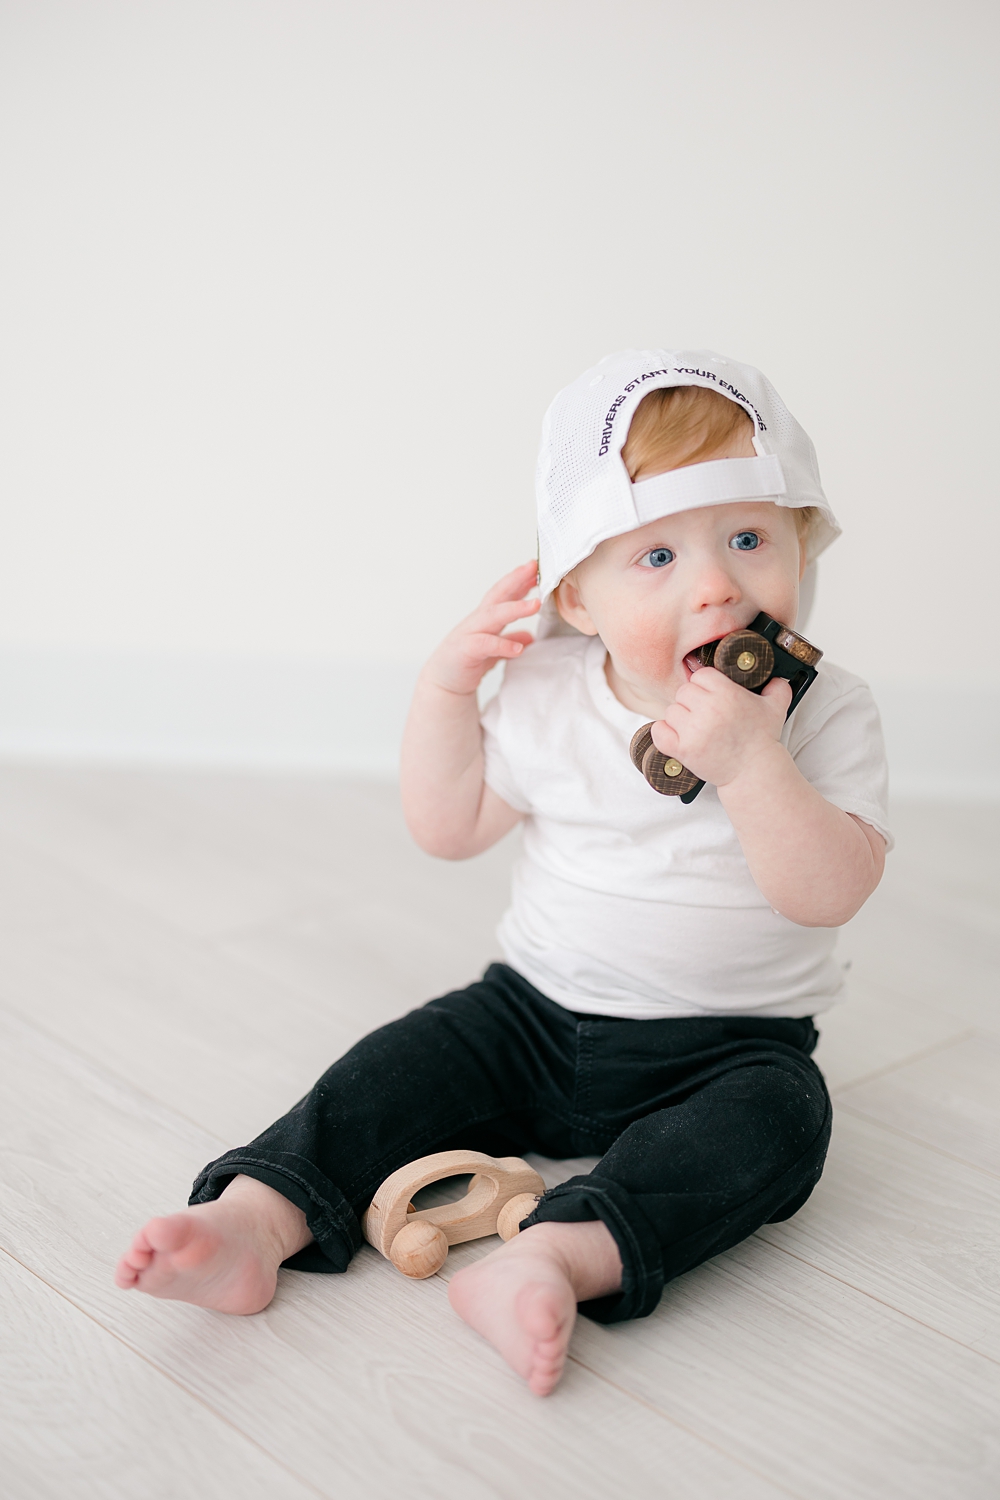 A little boy chews on a wooden toy car while he sits wearing a backwards white baseball cap.